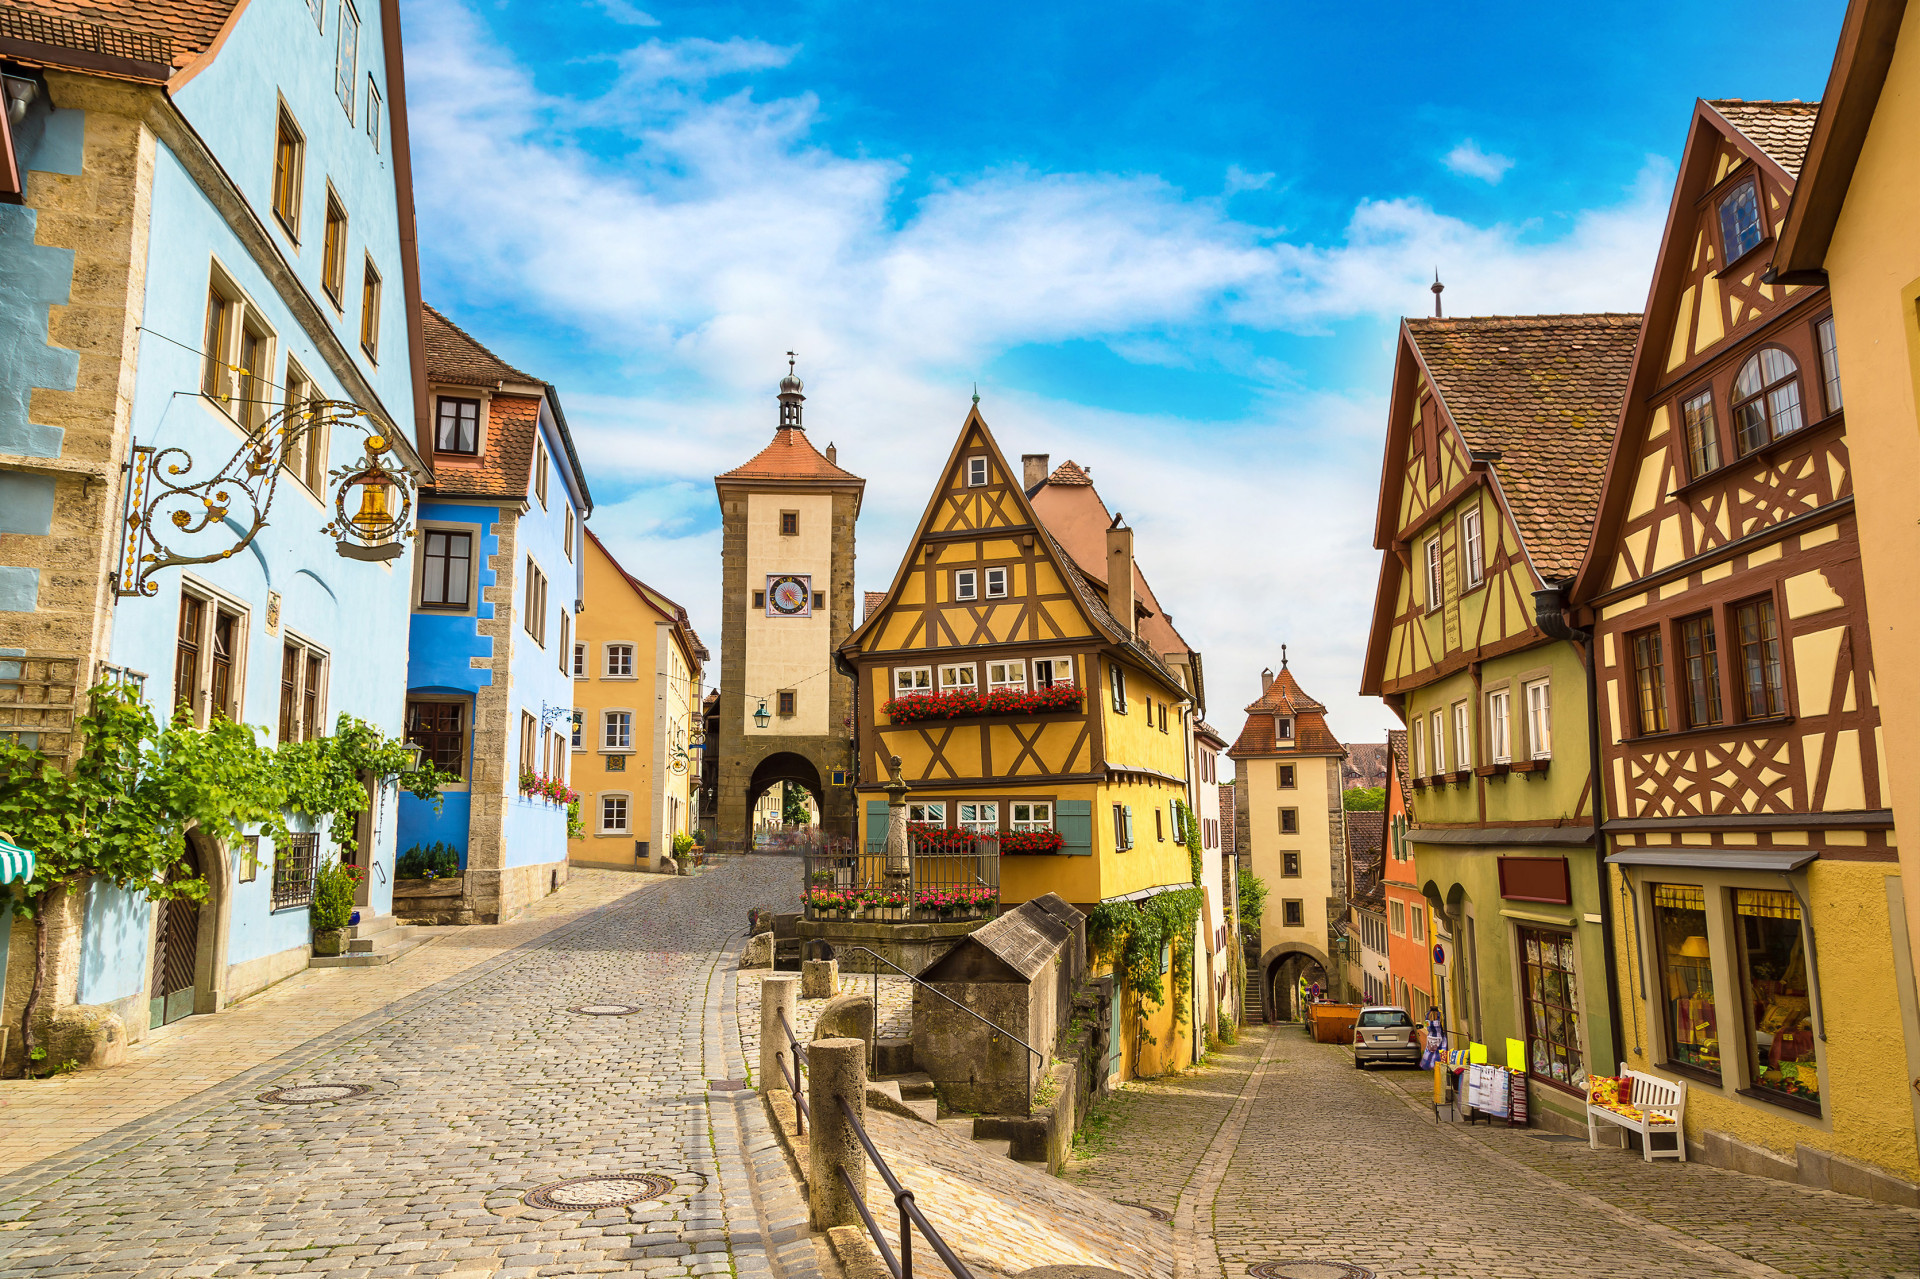 Visiting Rothenburg is like taking a trip in a time machine back to the Middle Ages. There's nothing better than walking through the charming fairy tale streets!<p><a href="https://www.msn.com/en-sg/community/channel/vid-7xx8mnucu55yw63we9va2gwr7uihbxwc68fxqp25x6tg4ftibpra?cvid=94631541bc0f4f89bfd59158d696ad7e">Follow us and access great exclusive content every day</a></p>